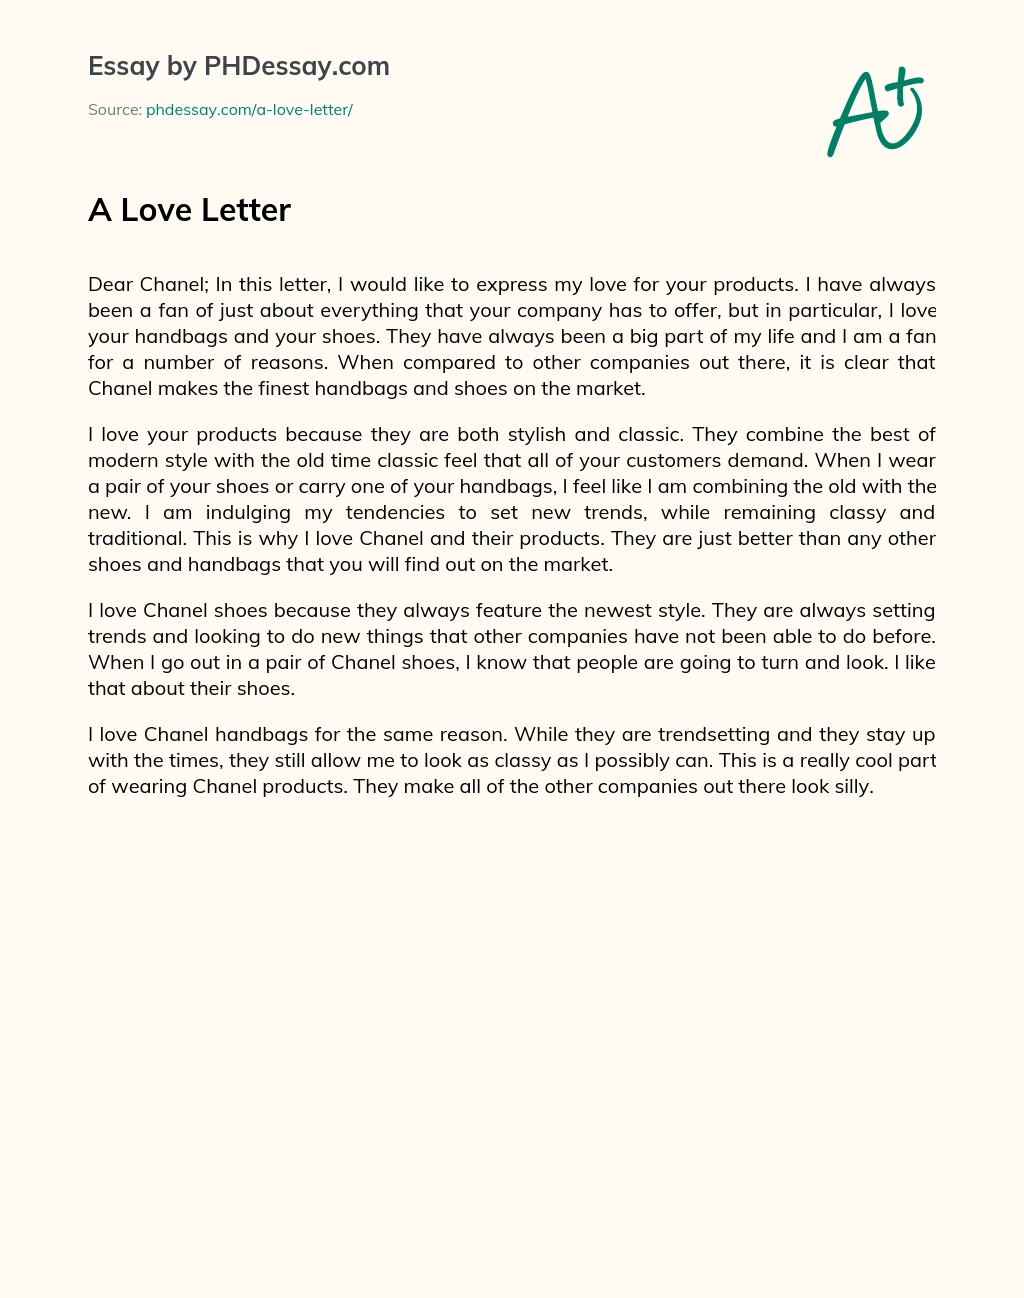 A Love Letter essay